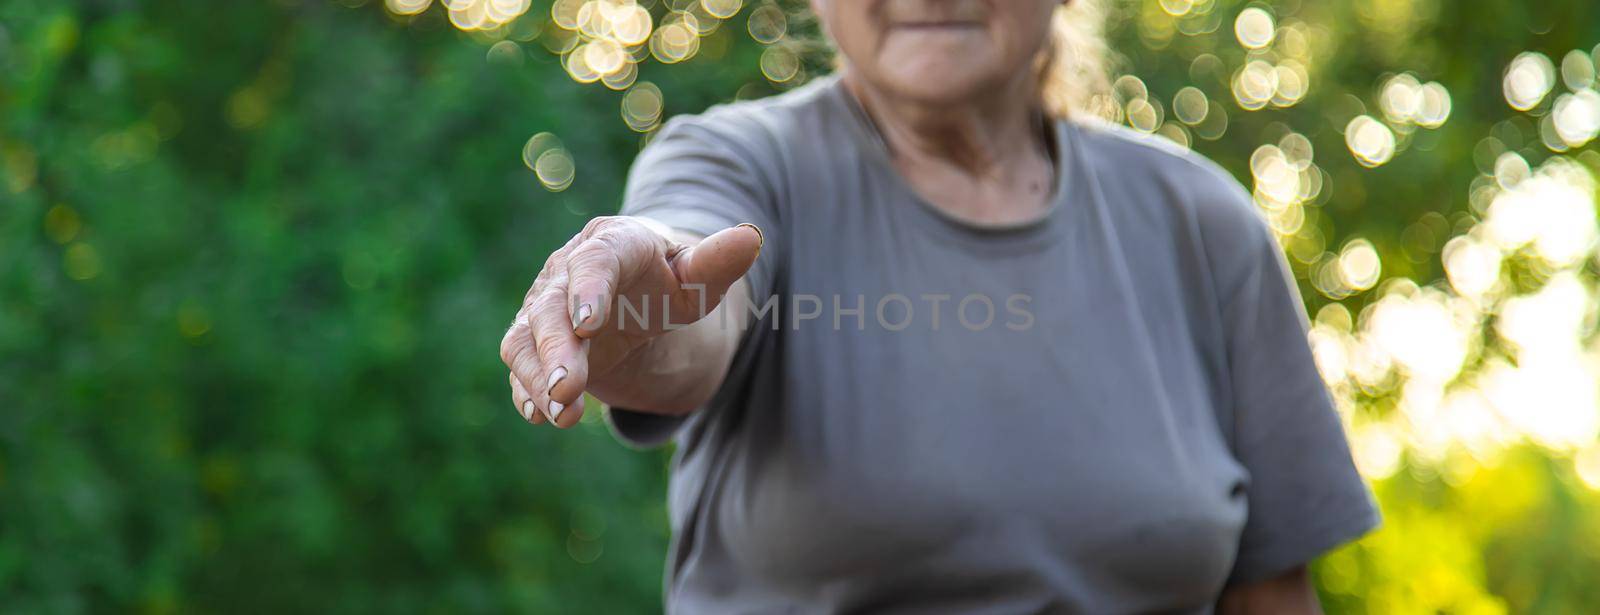 grandmother lends a helping hand. Selective focus. people.